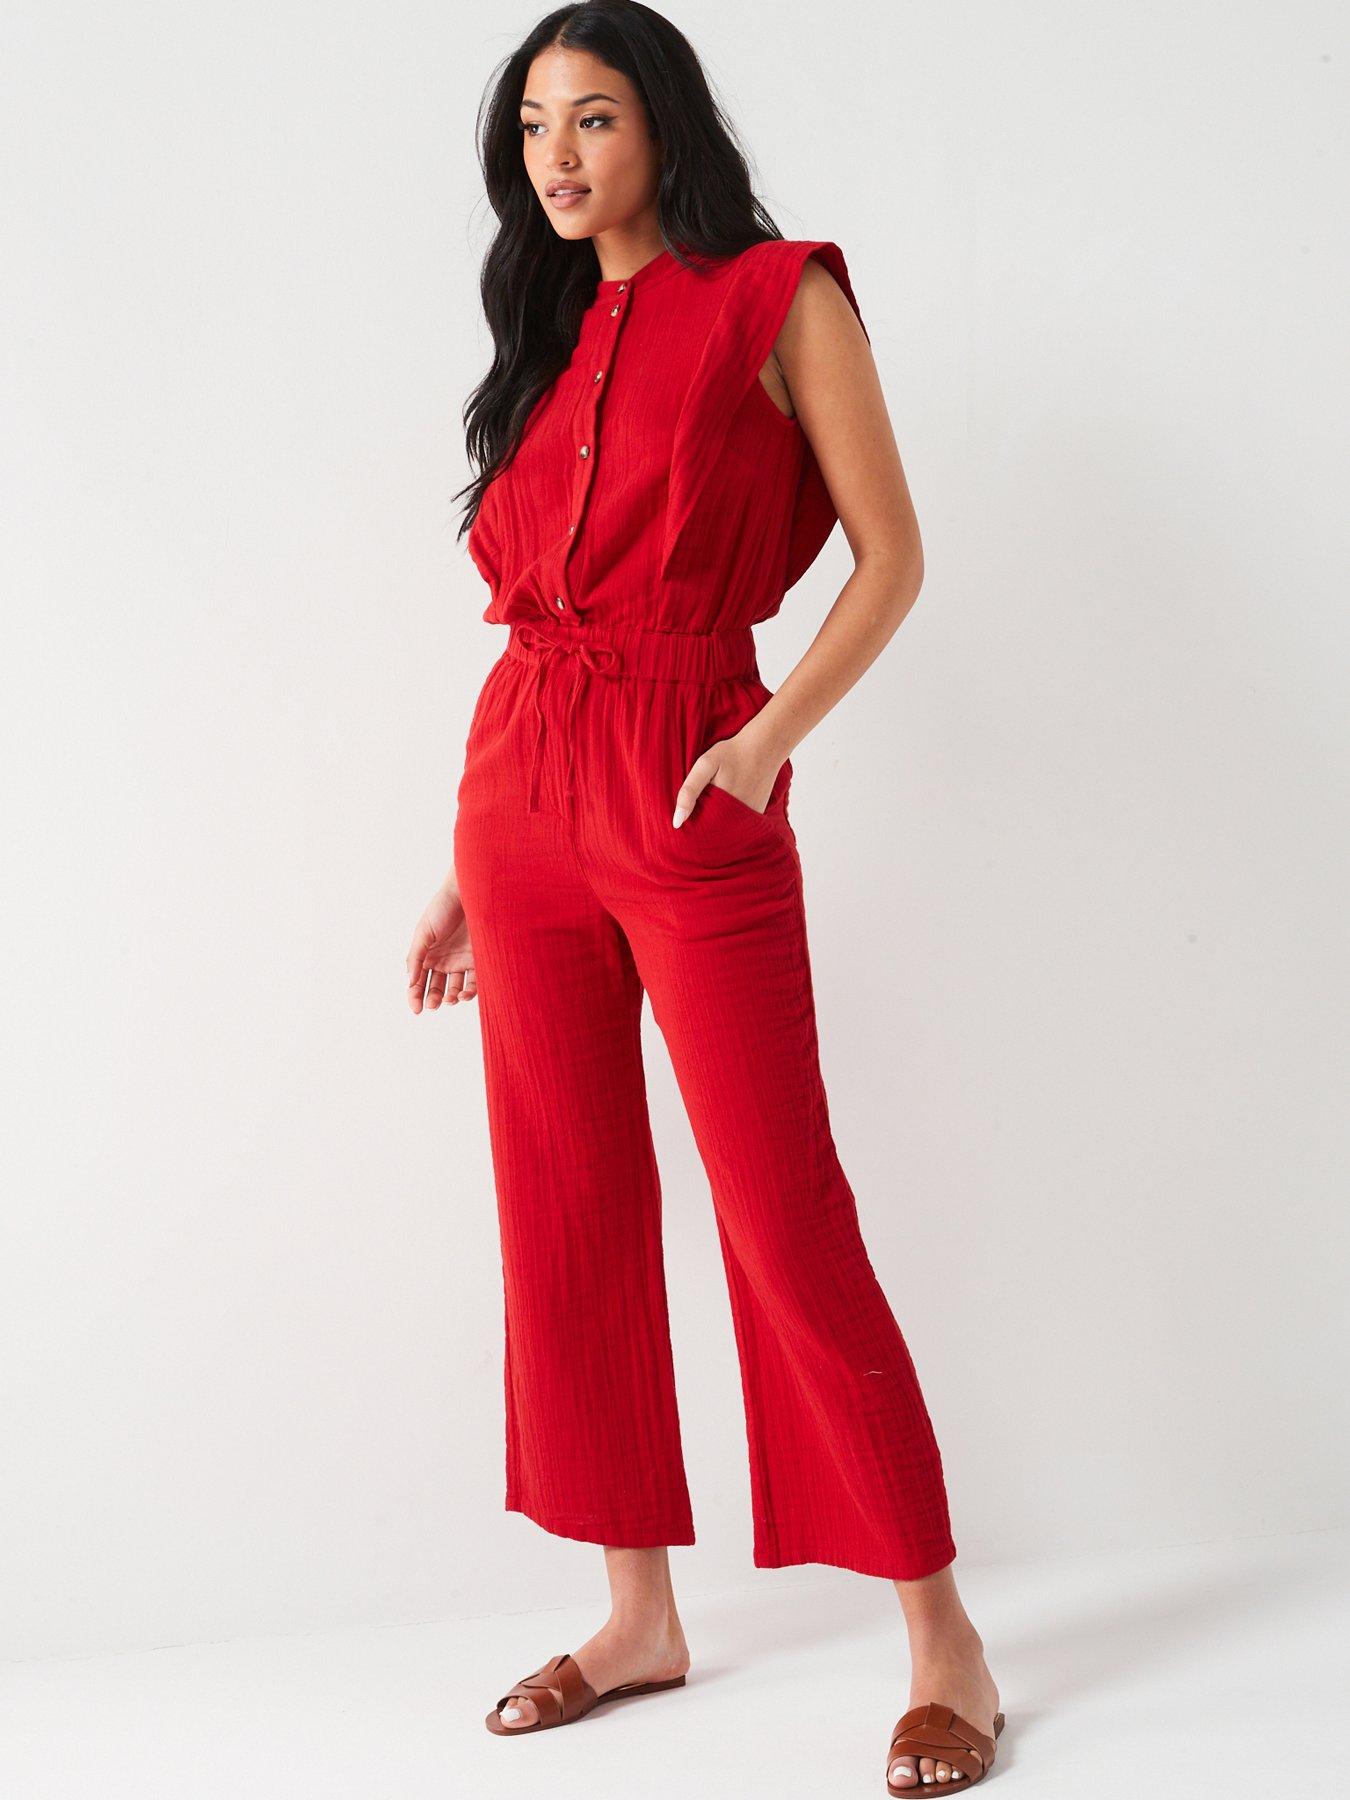 V by very | Playsuits & jumpsuits | Women | Very Ireland